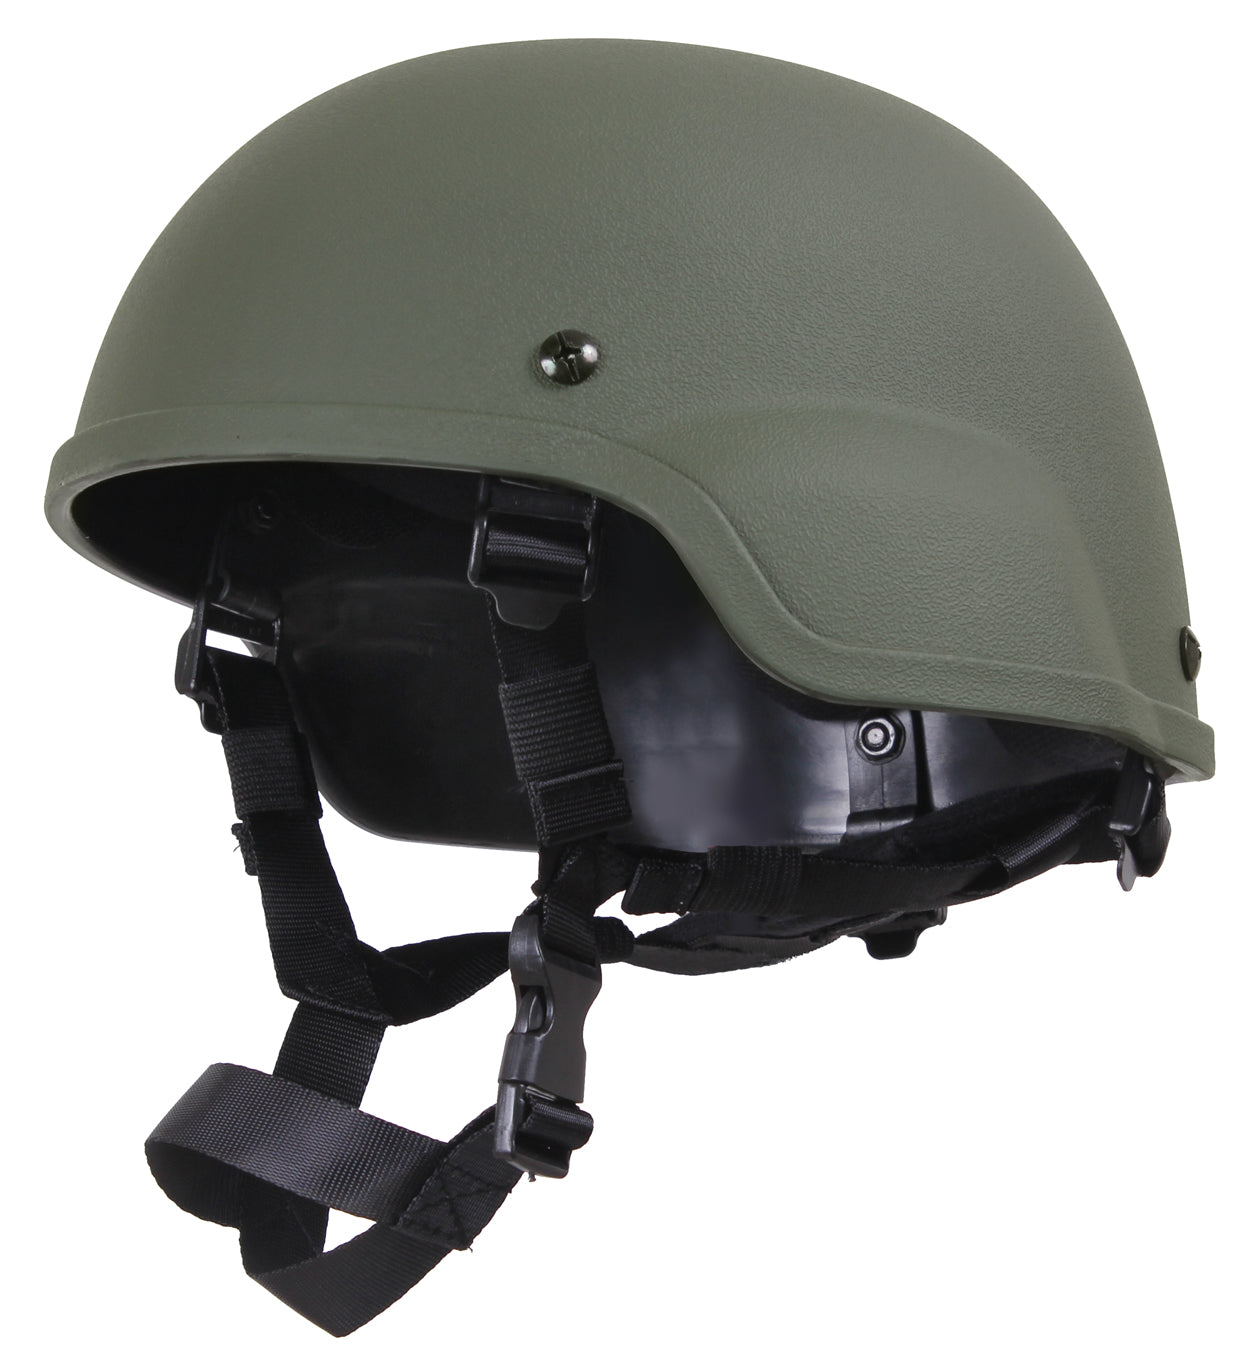 Rothco ABS Mich 2000 Replica Tactical Helmet